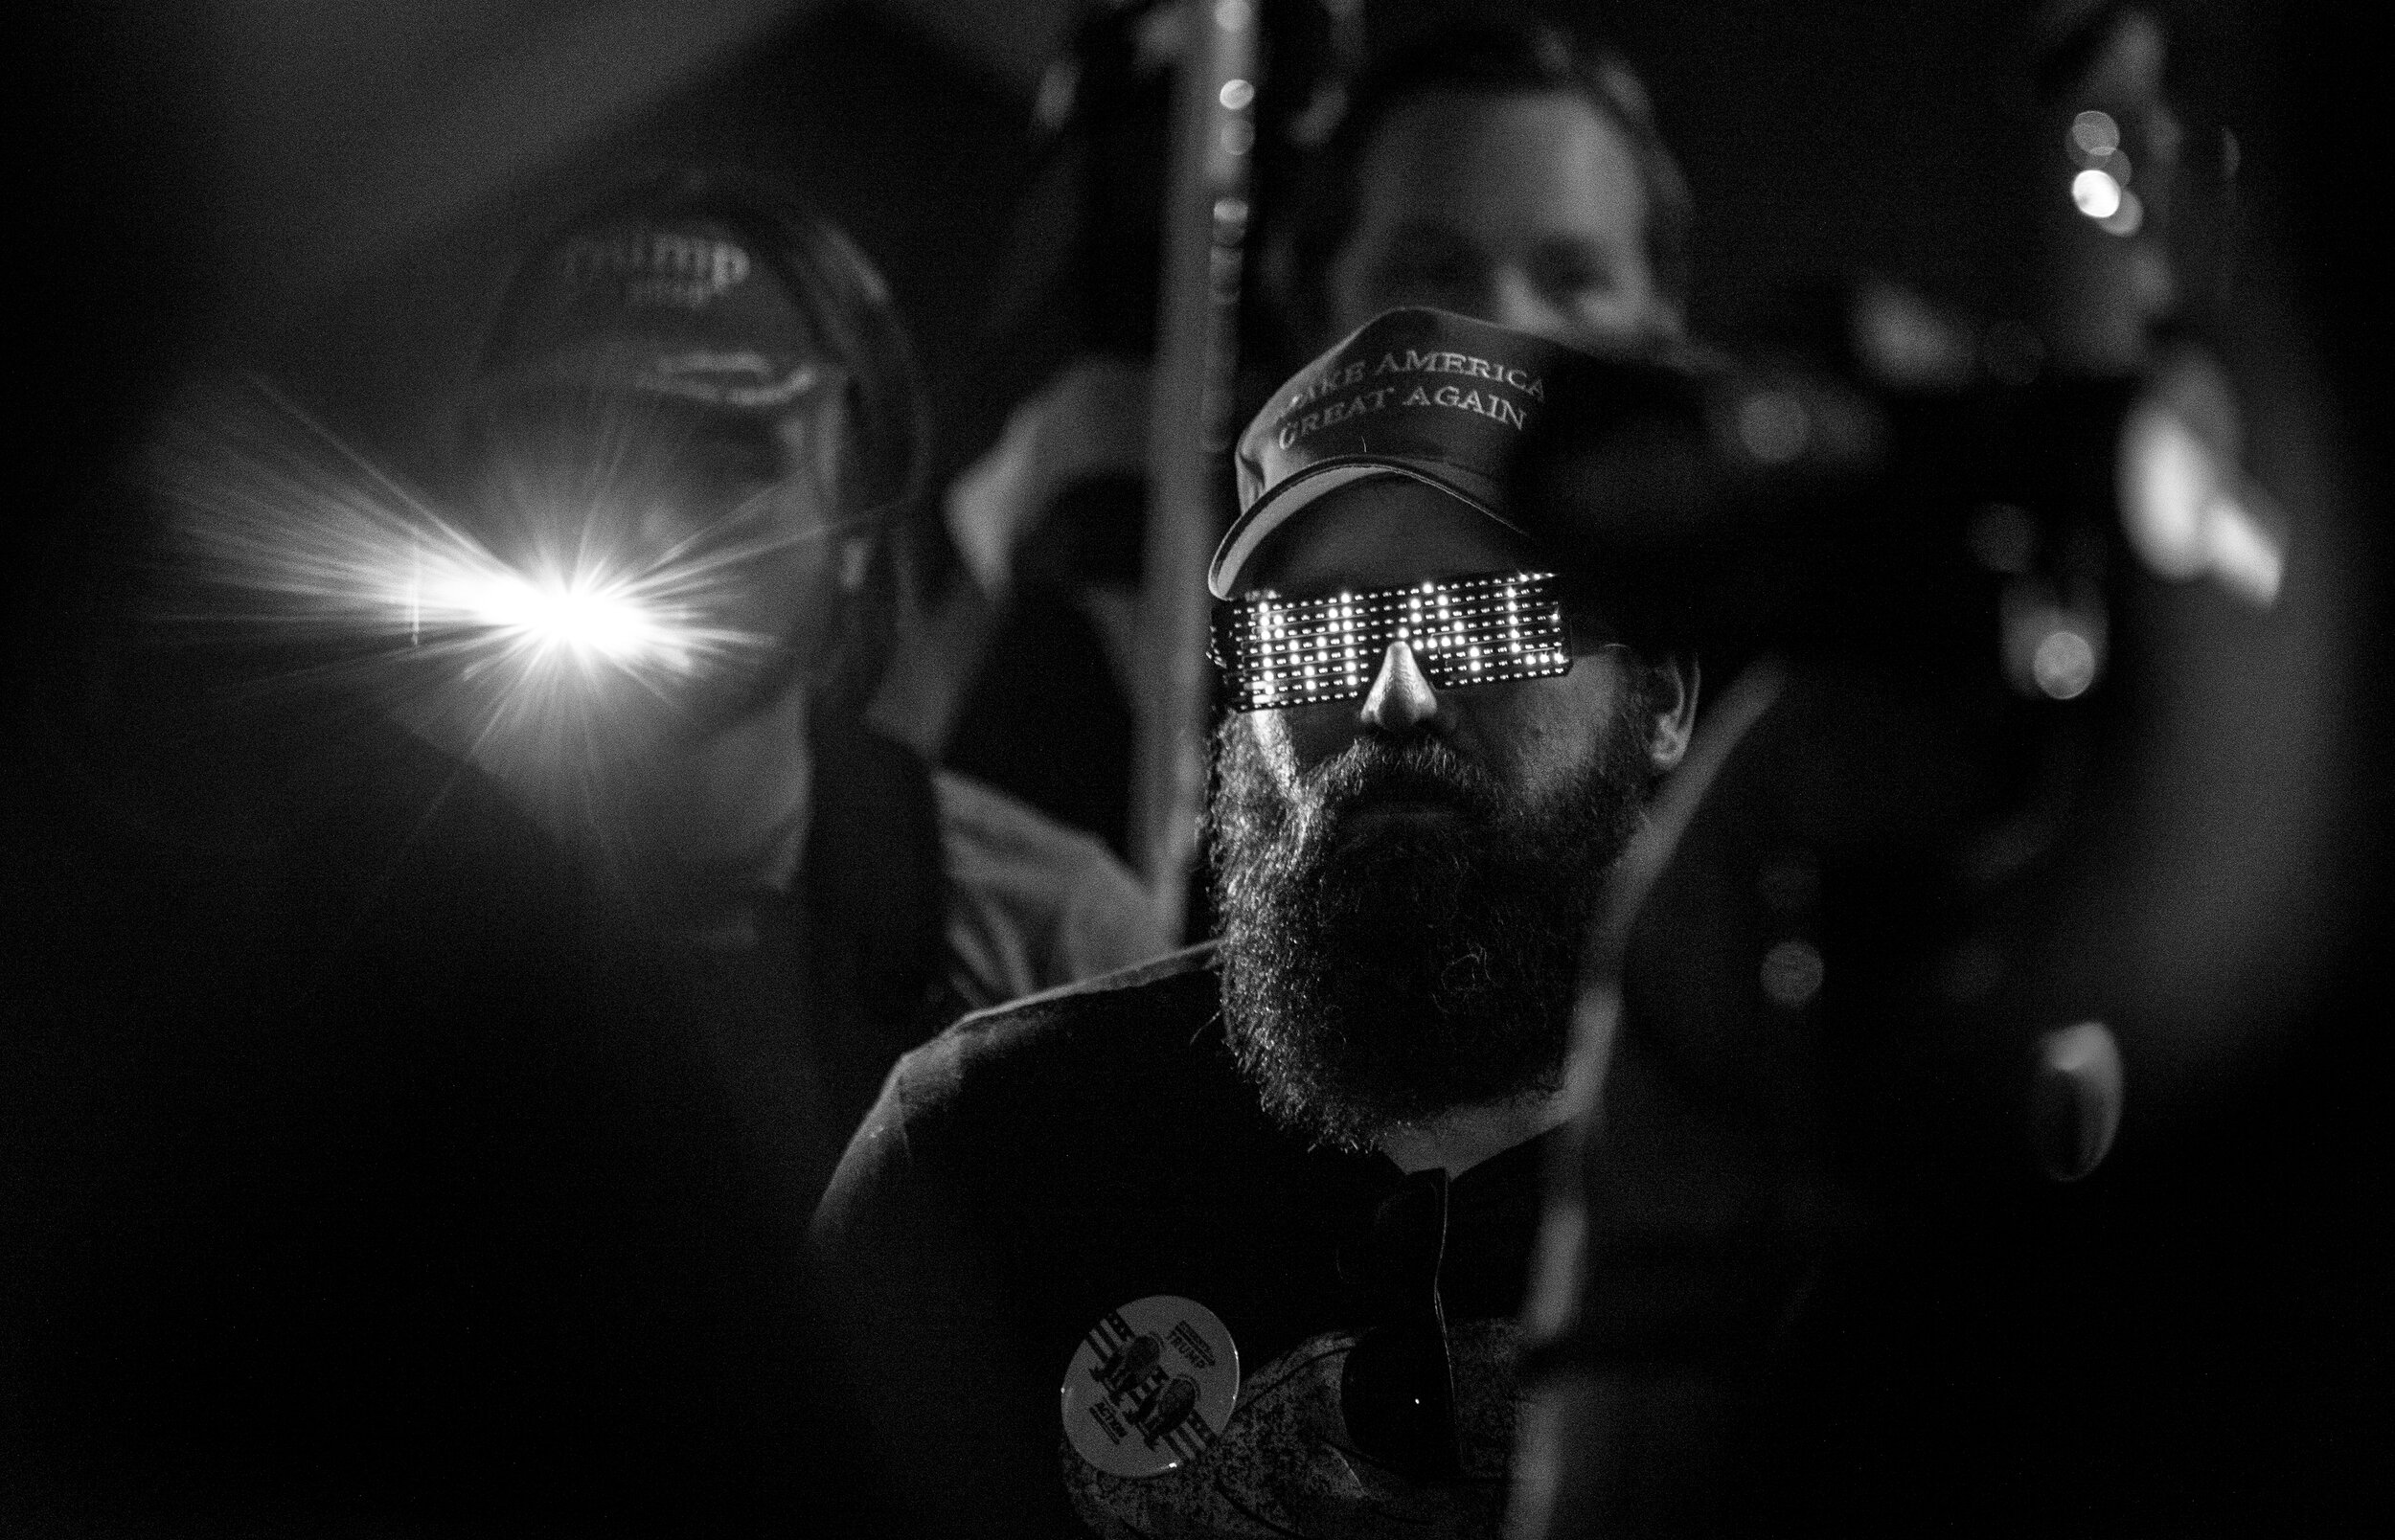  PHOENIX, AZ - NOVEMBER 5, 2020:  A Trump supporter wears glasses that illuminate the word “MAGA” while attending a “Stop the Steal” protest in the parking lot at the Maricopa  County Tabulation and Election Center as presidential ballots continue to